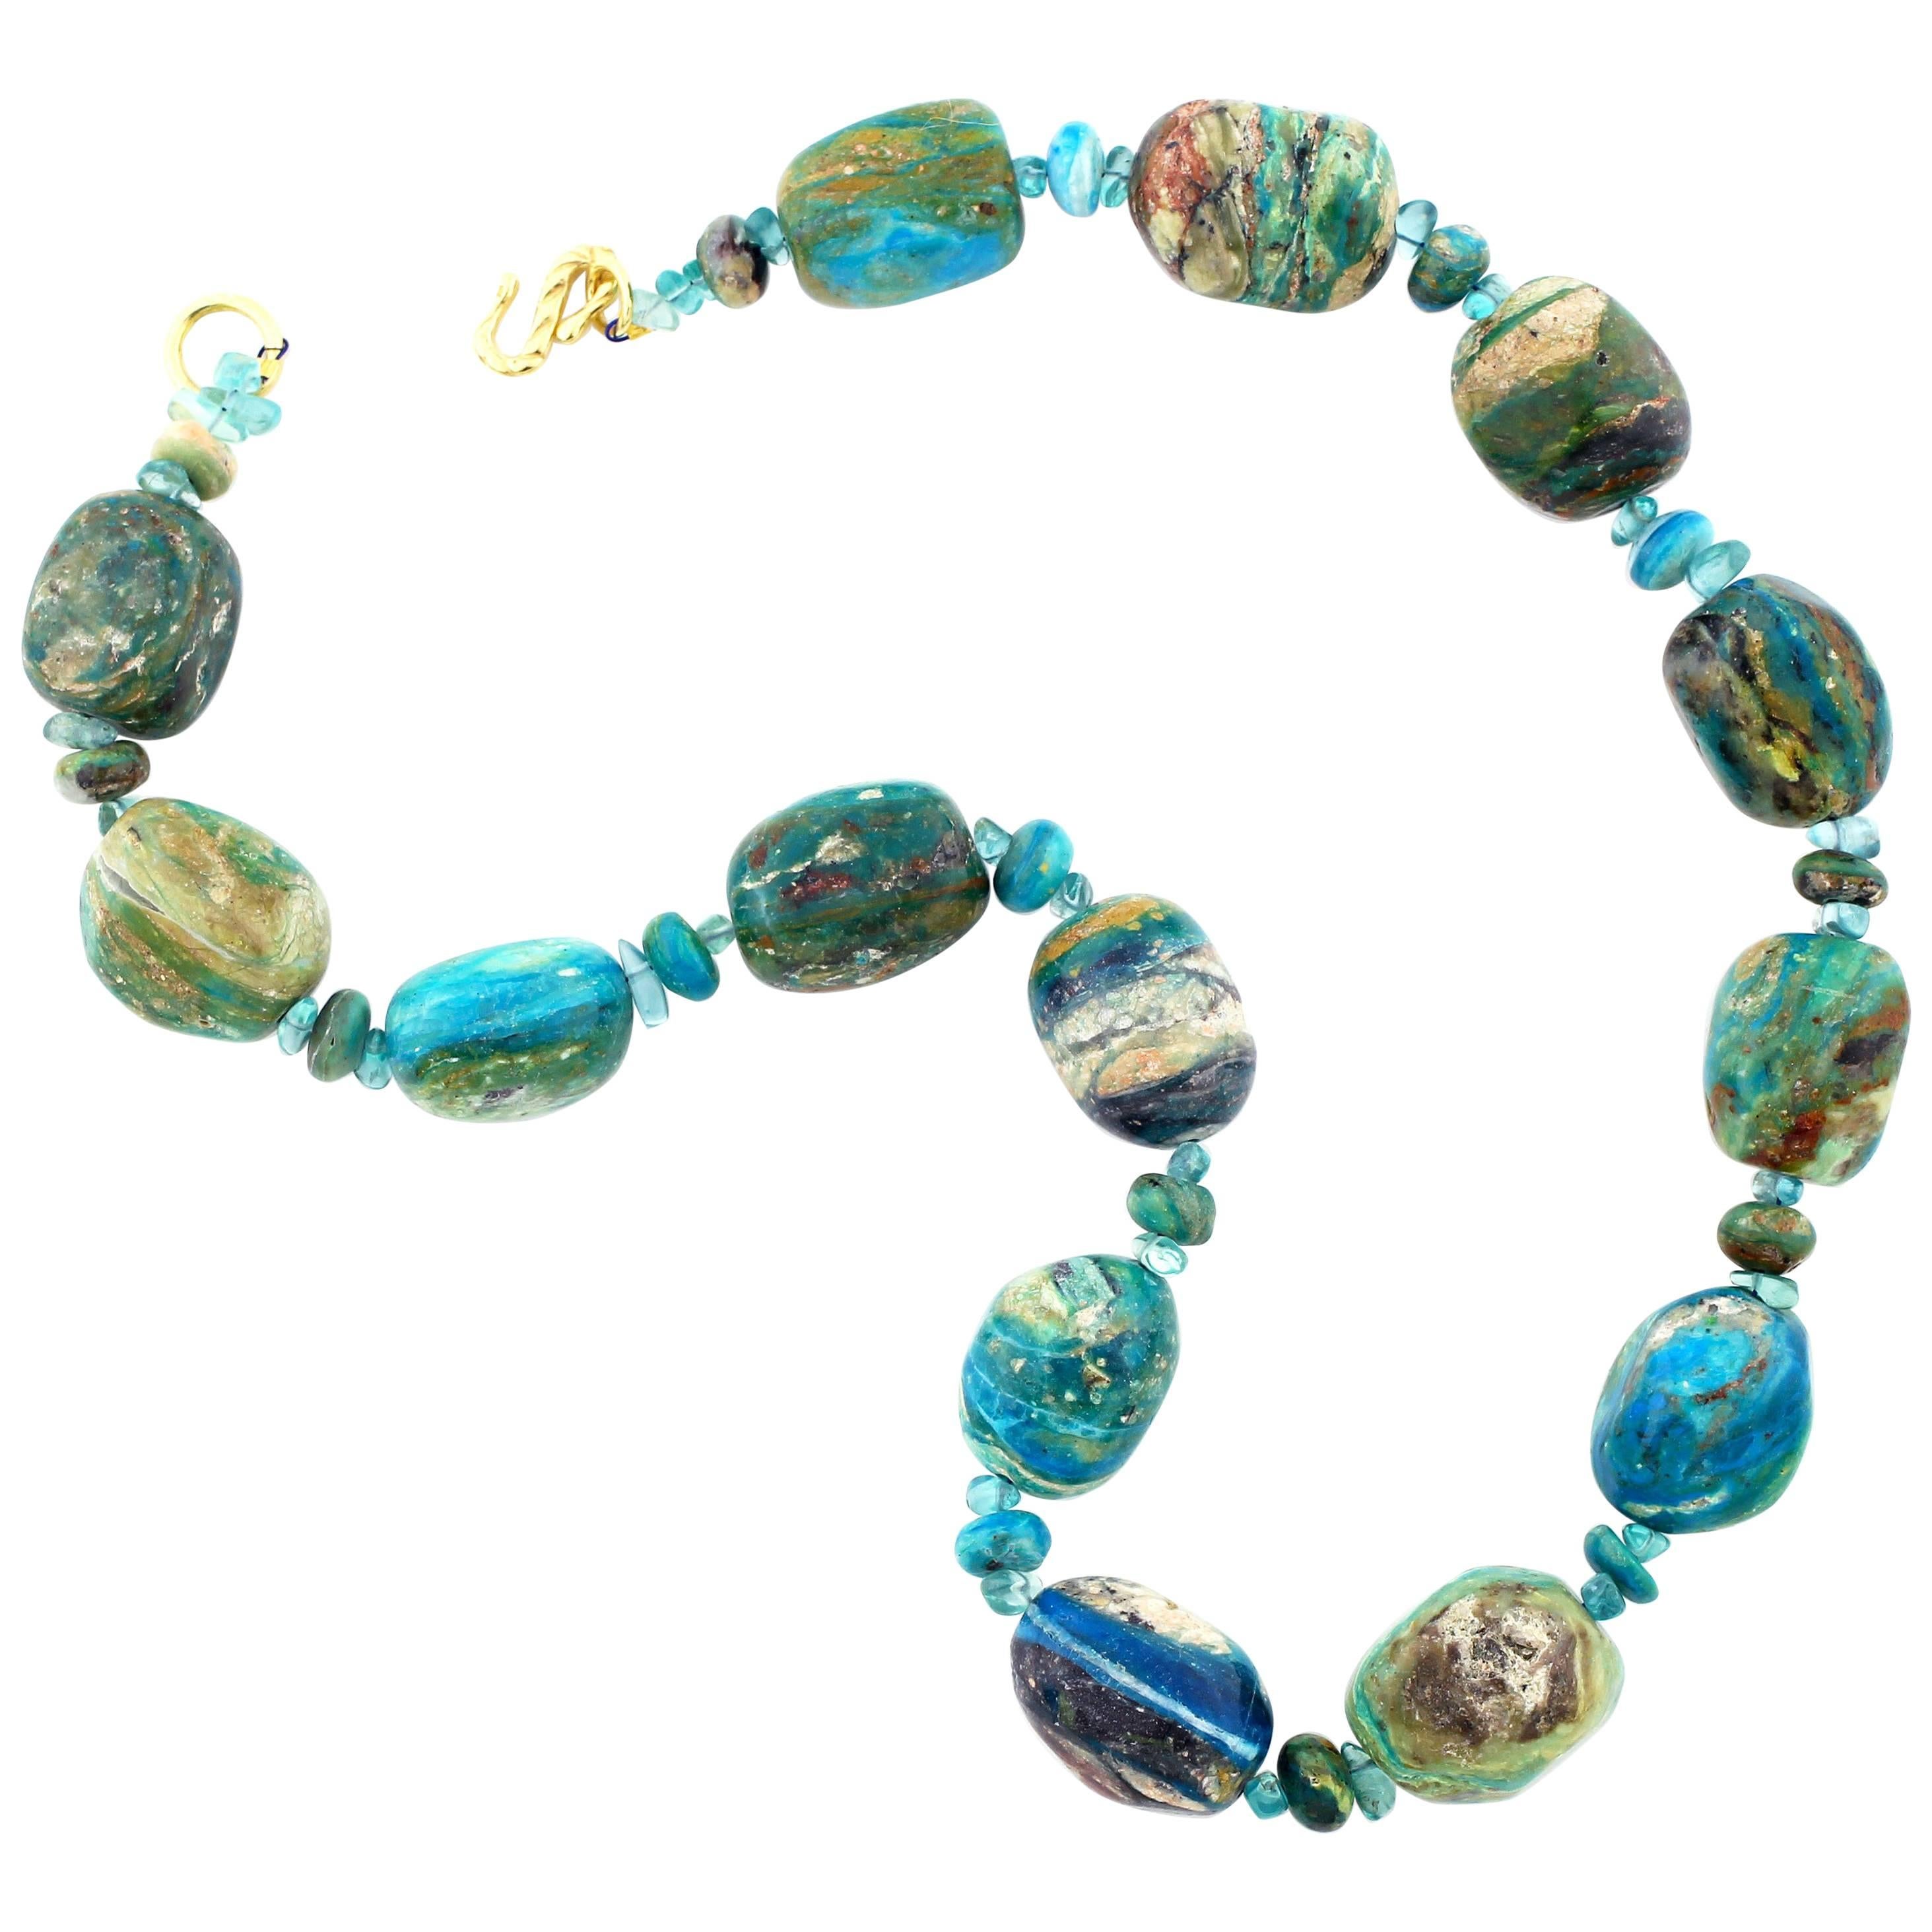 AJD GORGEOUS RARE Dramatic Blue Peruvian Opal Necklace w/Gold Plated Clasp